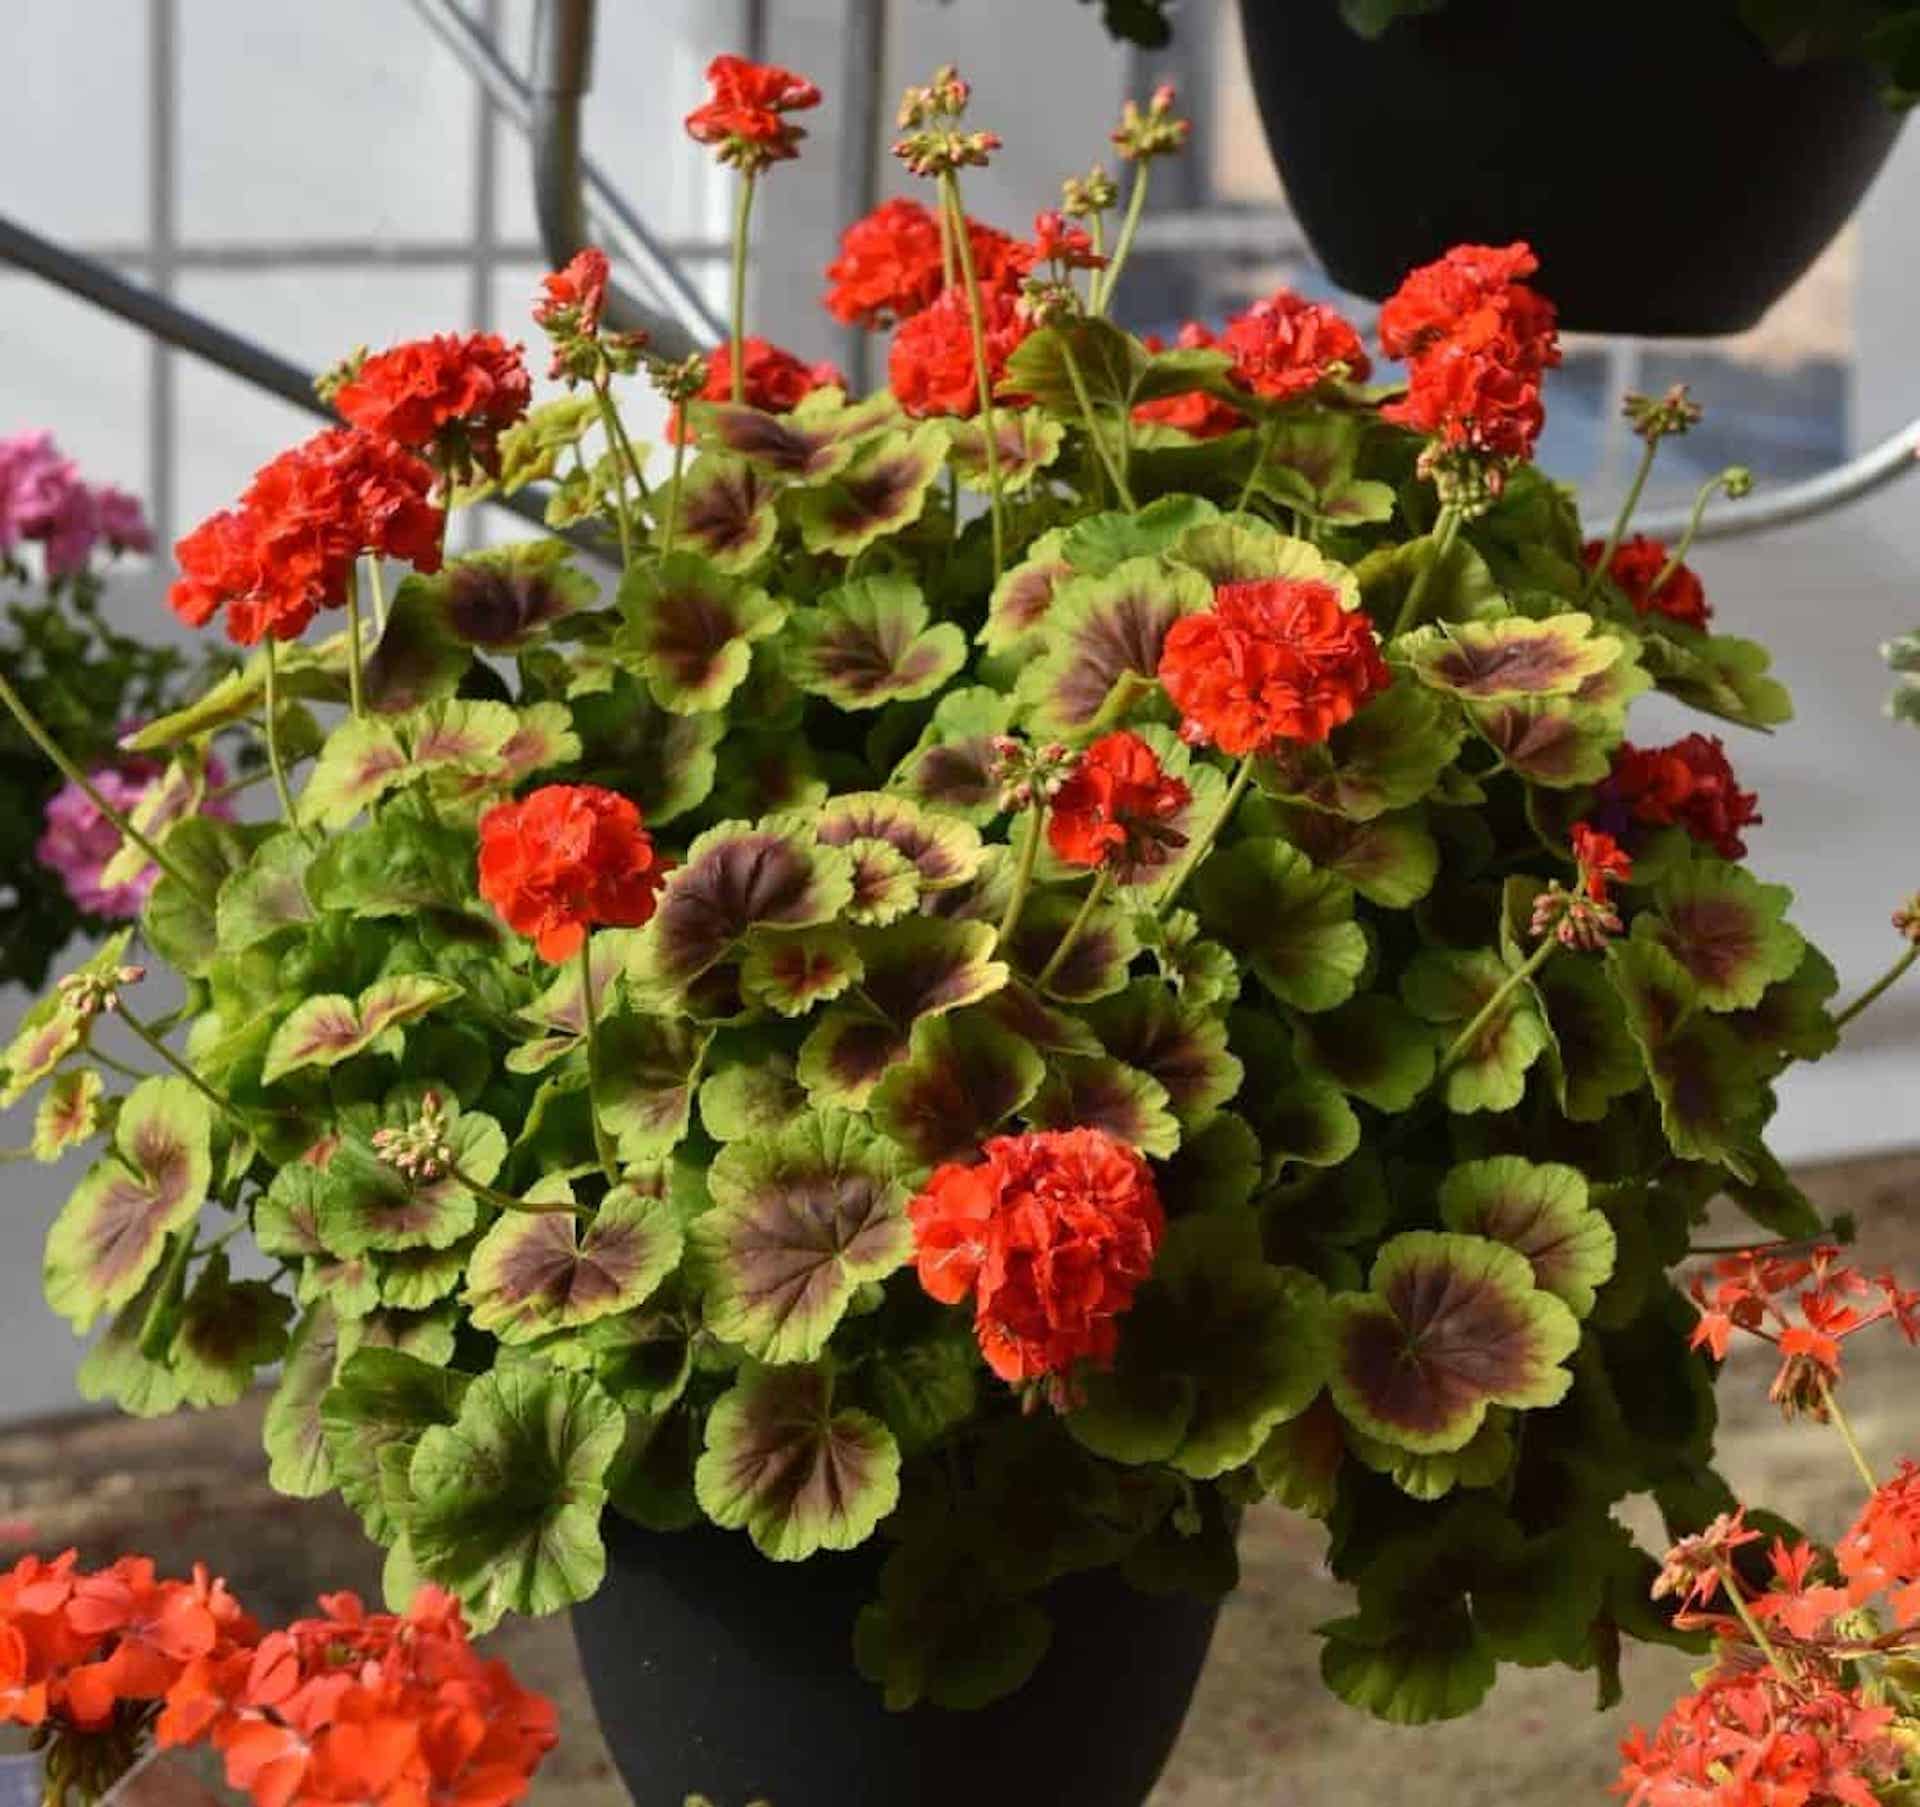 Zonal pelargonium 'Brocade Fire', with double red flowers and purple and green leaves.